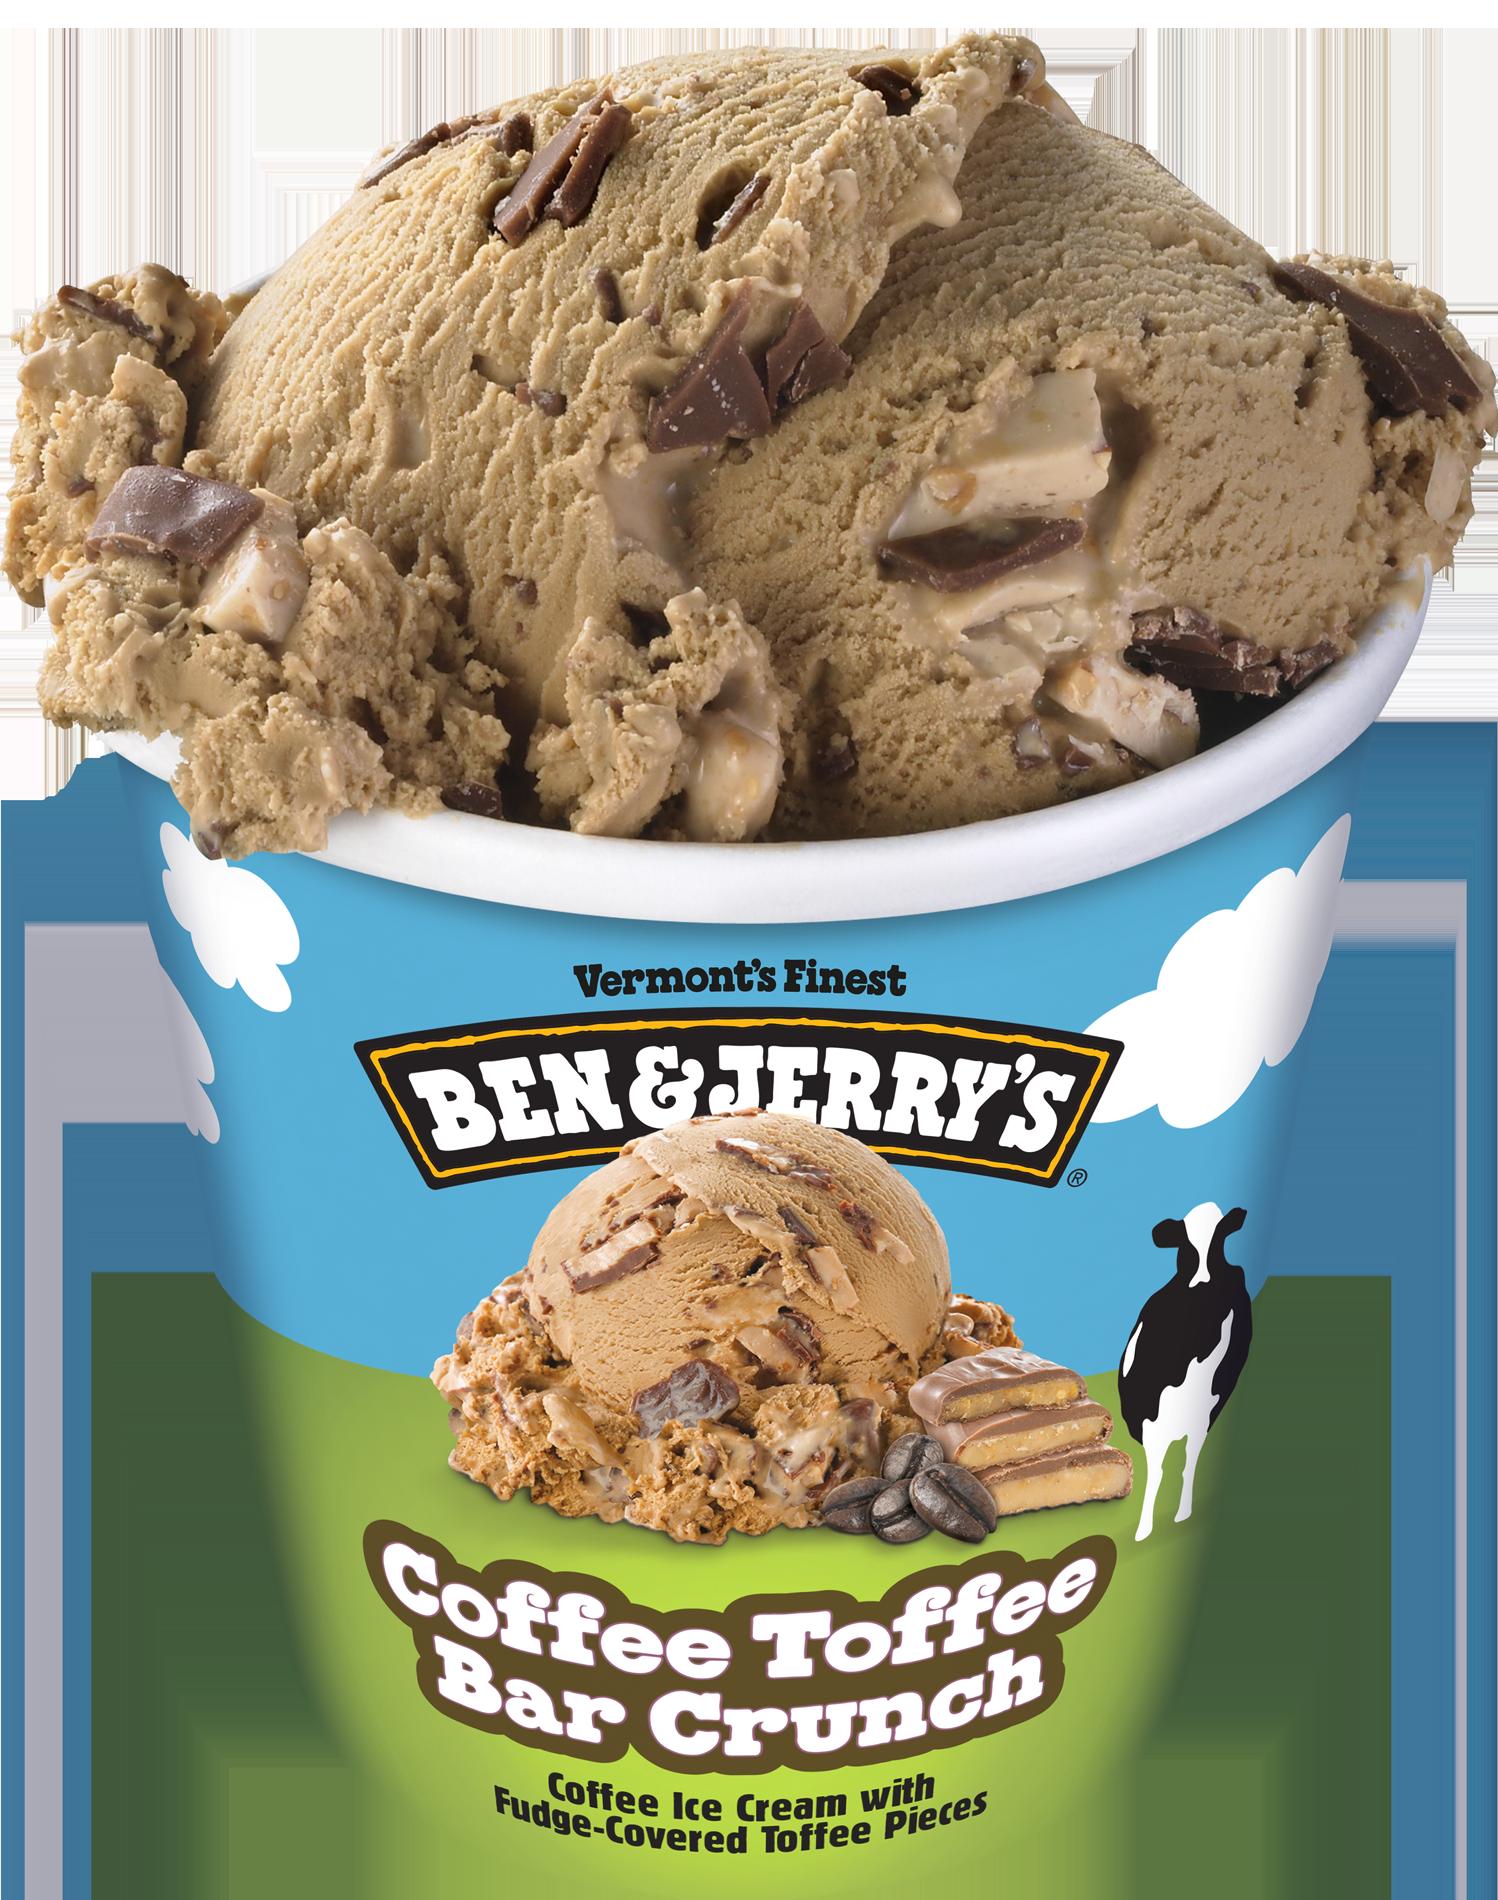  Creamy, dreamy, and filled with coffee flavor - this ice cream is simply irresistible!